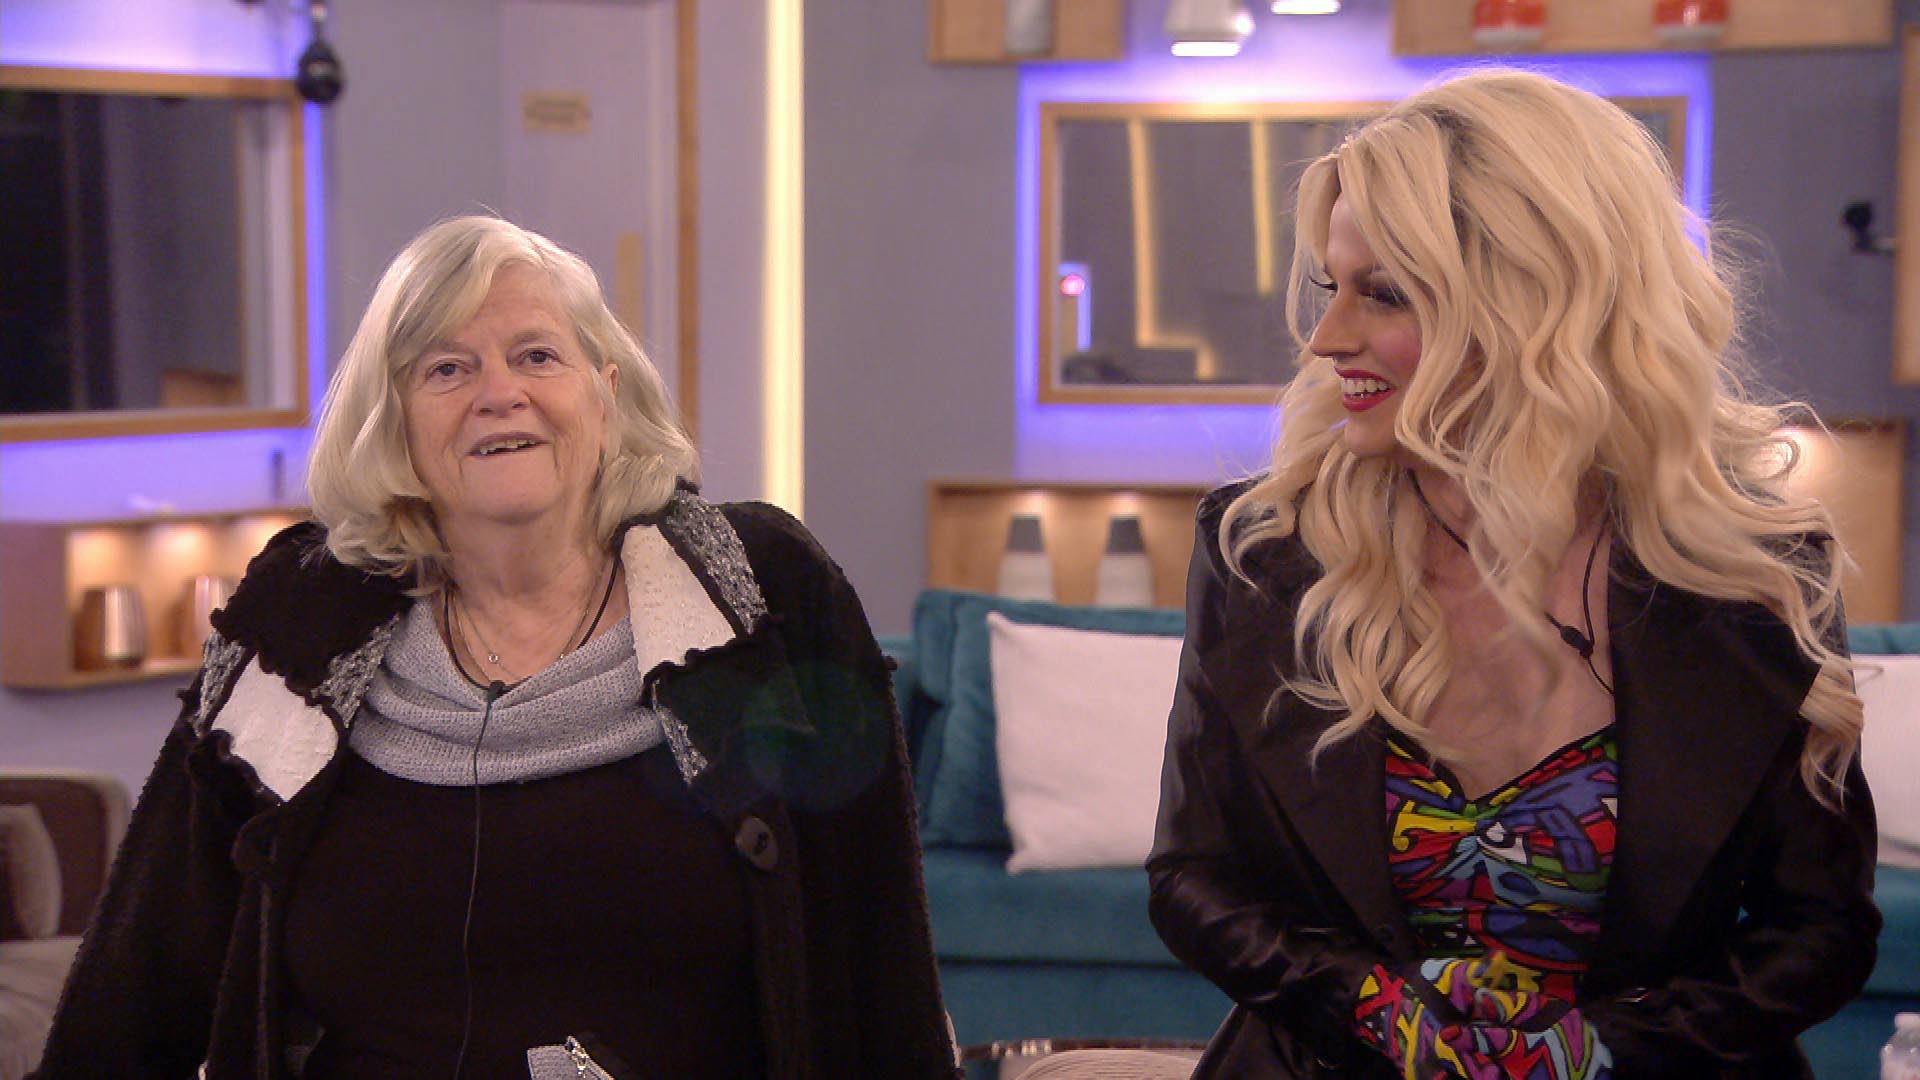 Finalists Ann Widdecombe and Courtney Act (Channel 5)